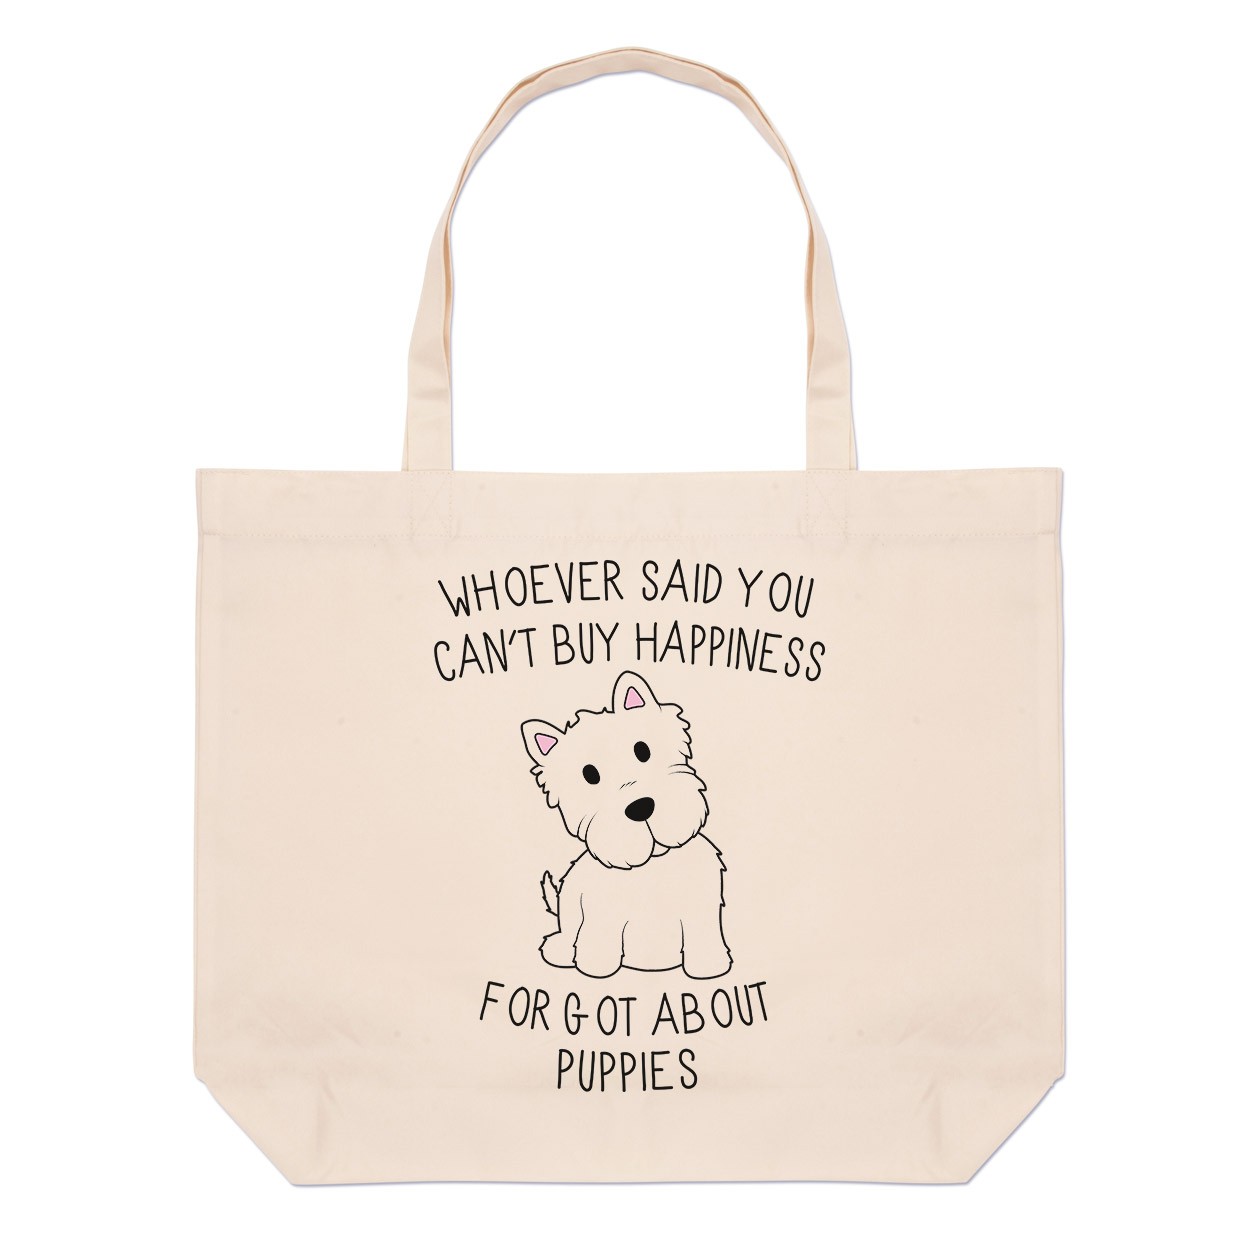 Whoever Said You Can't Buy Happiness Forgot About Puppies Large Beach Tote Bag